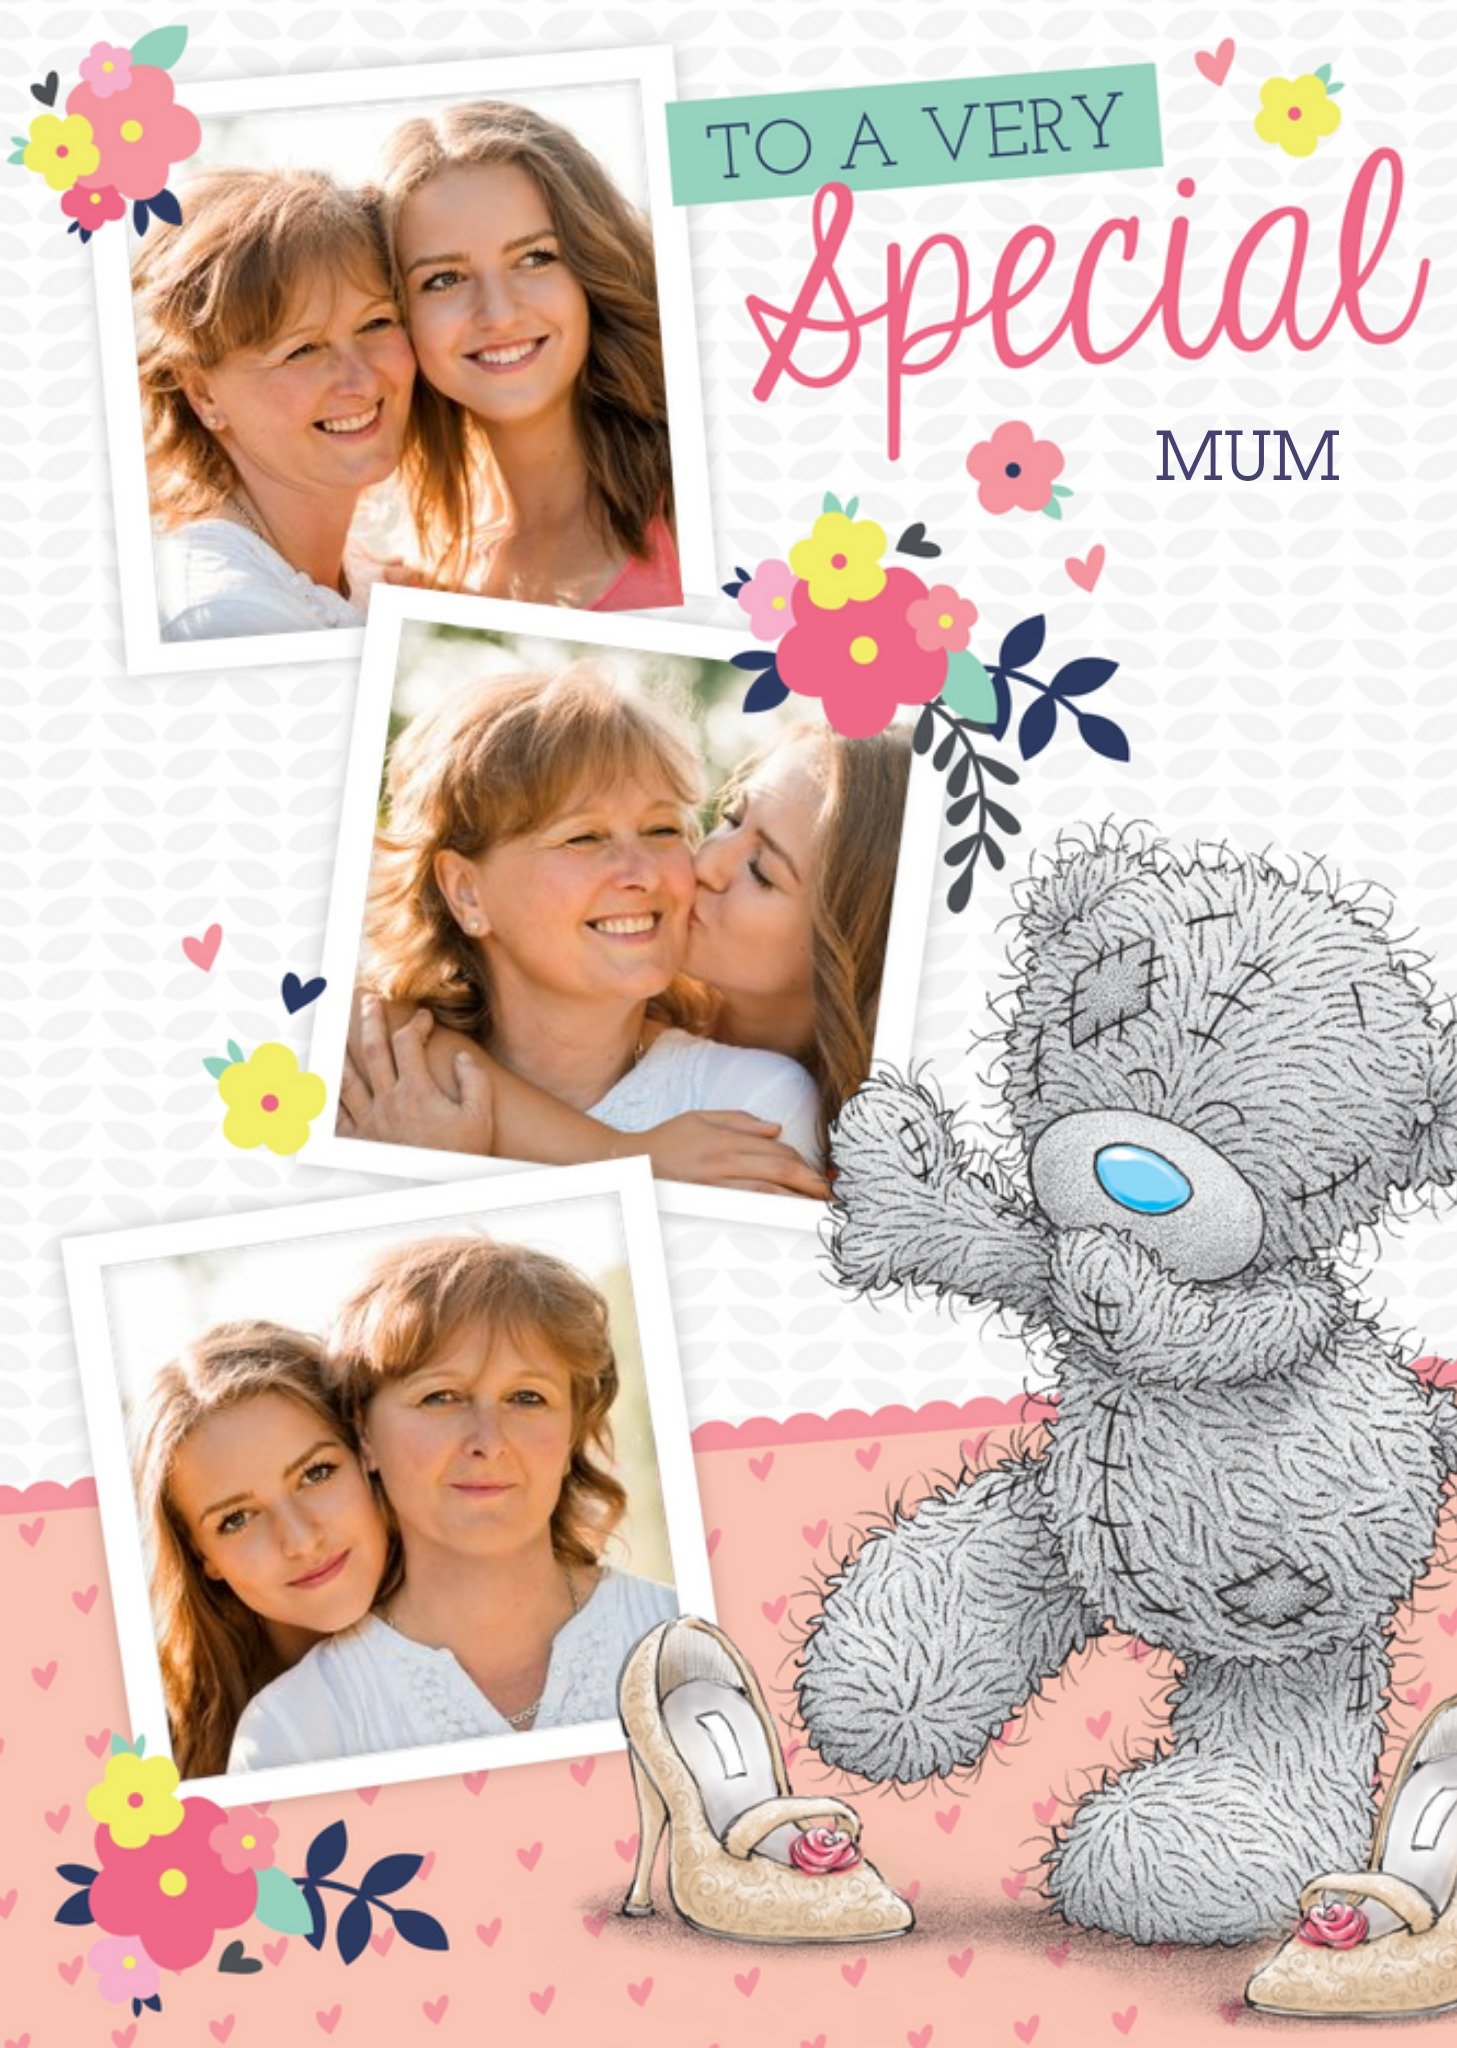 Me To You Mother's Day Card - Tatty Teddy Photo Upload Card - To A Very Special Mum, Large